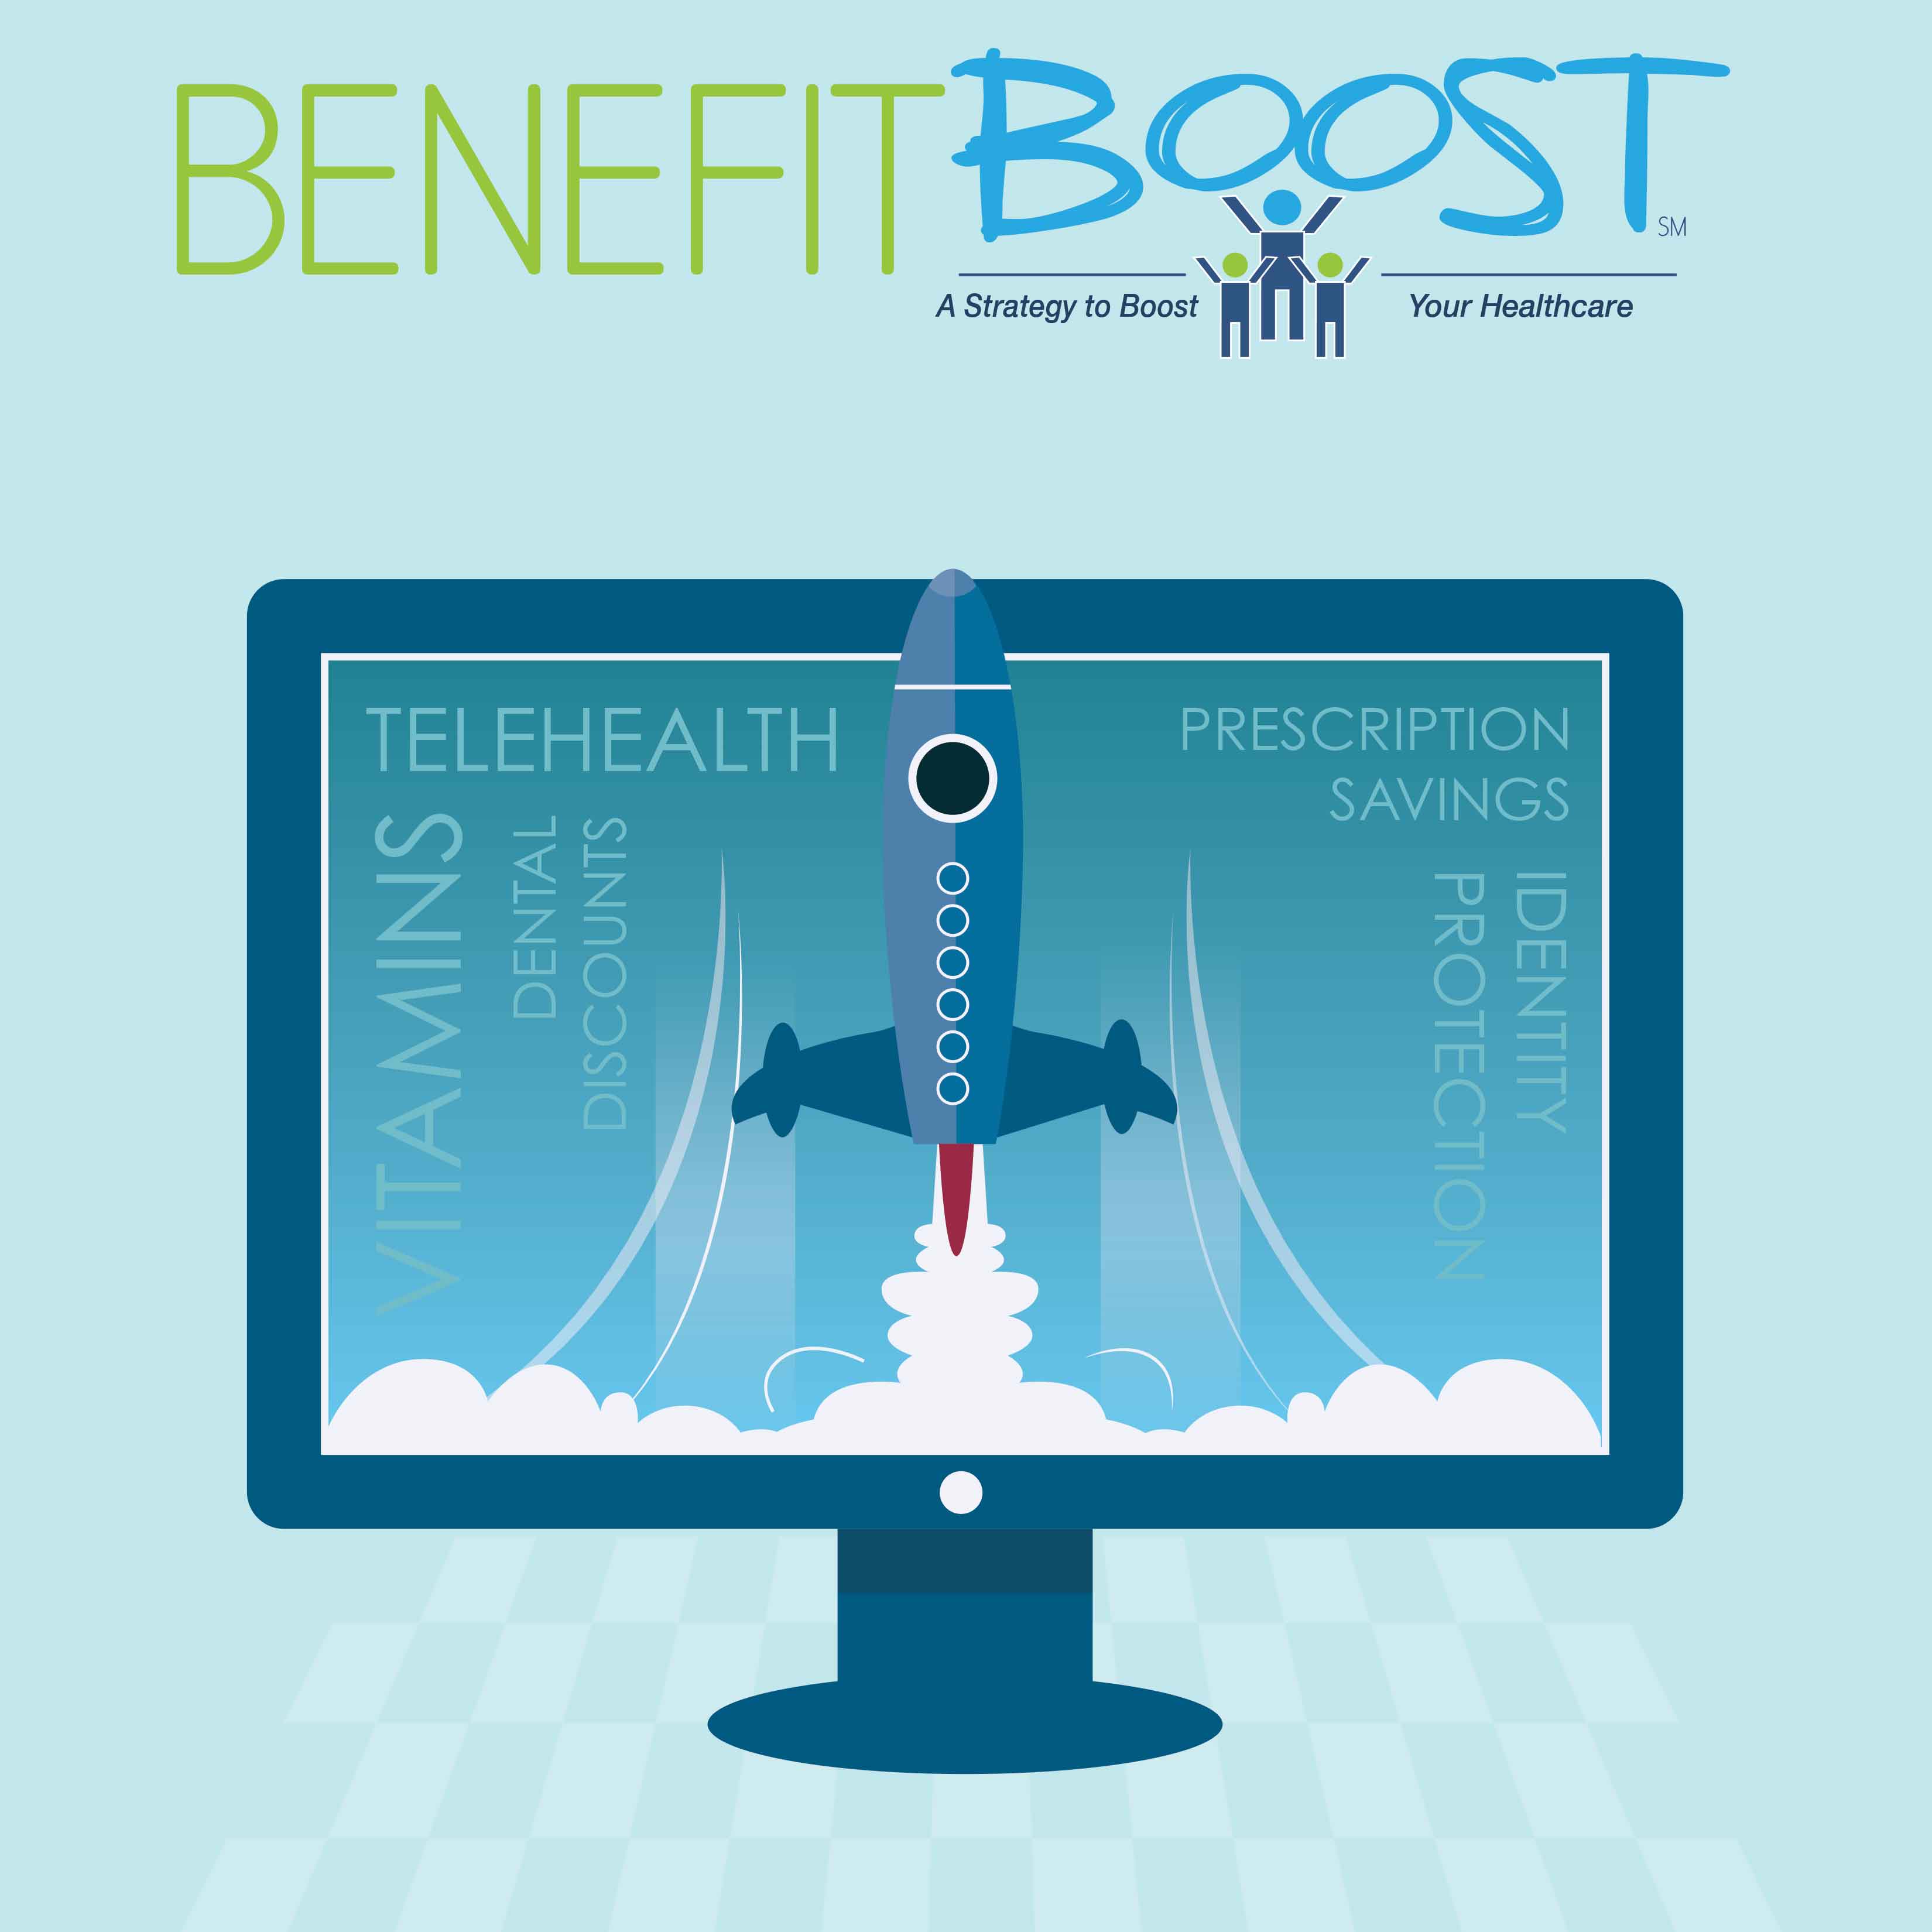 Benefit Boost, a Benefit Boost Subscription Product